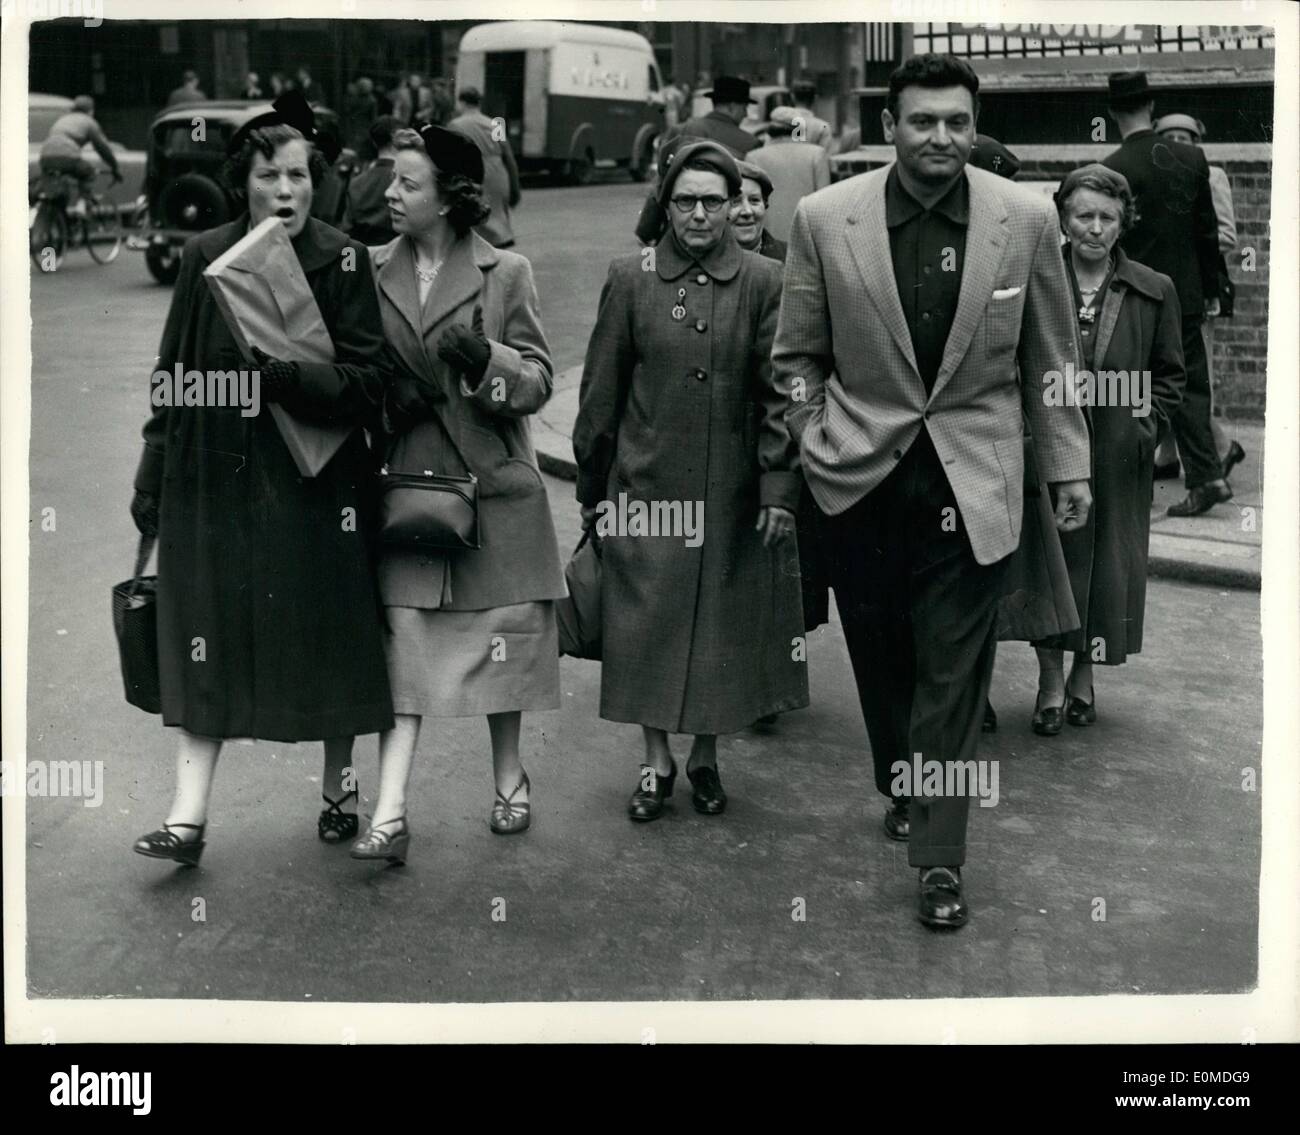 Sep. 09, 1954 - They did not even Recognize him. American Crooner out Walking in Leicester Square. When Frankie Laine - American Crooner arrived at London Airport he was met by an organised reception committee of a crowd of teenage fans..When he went for a walk in Leicester Square this morning he was not even recognised by the passers-by. Photo Shows: FRANKIE LAINE walks un-recognised in Leicester Square this afternoon. Stock Photo